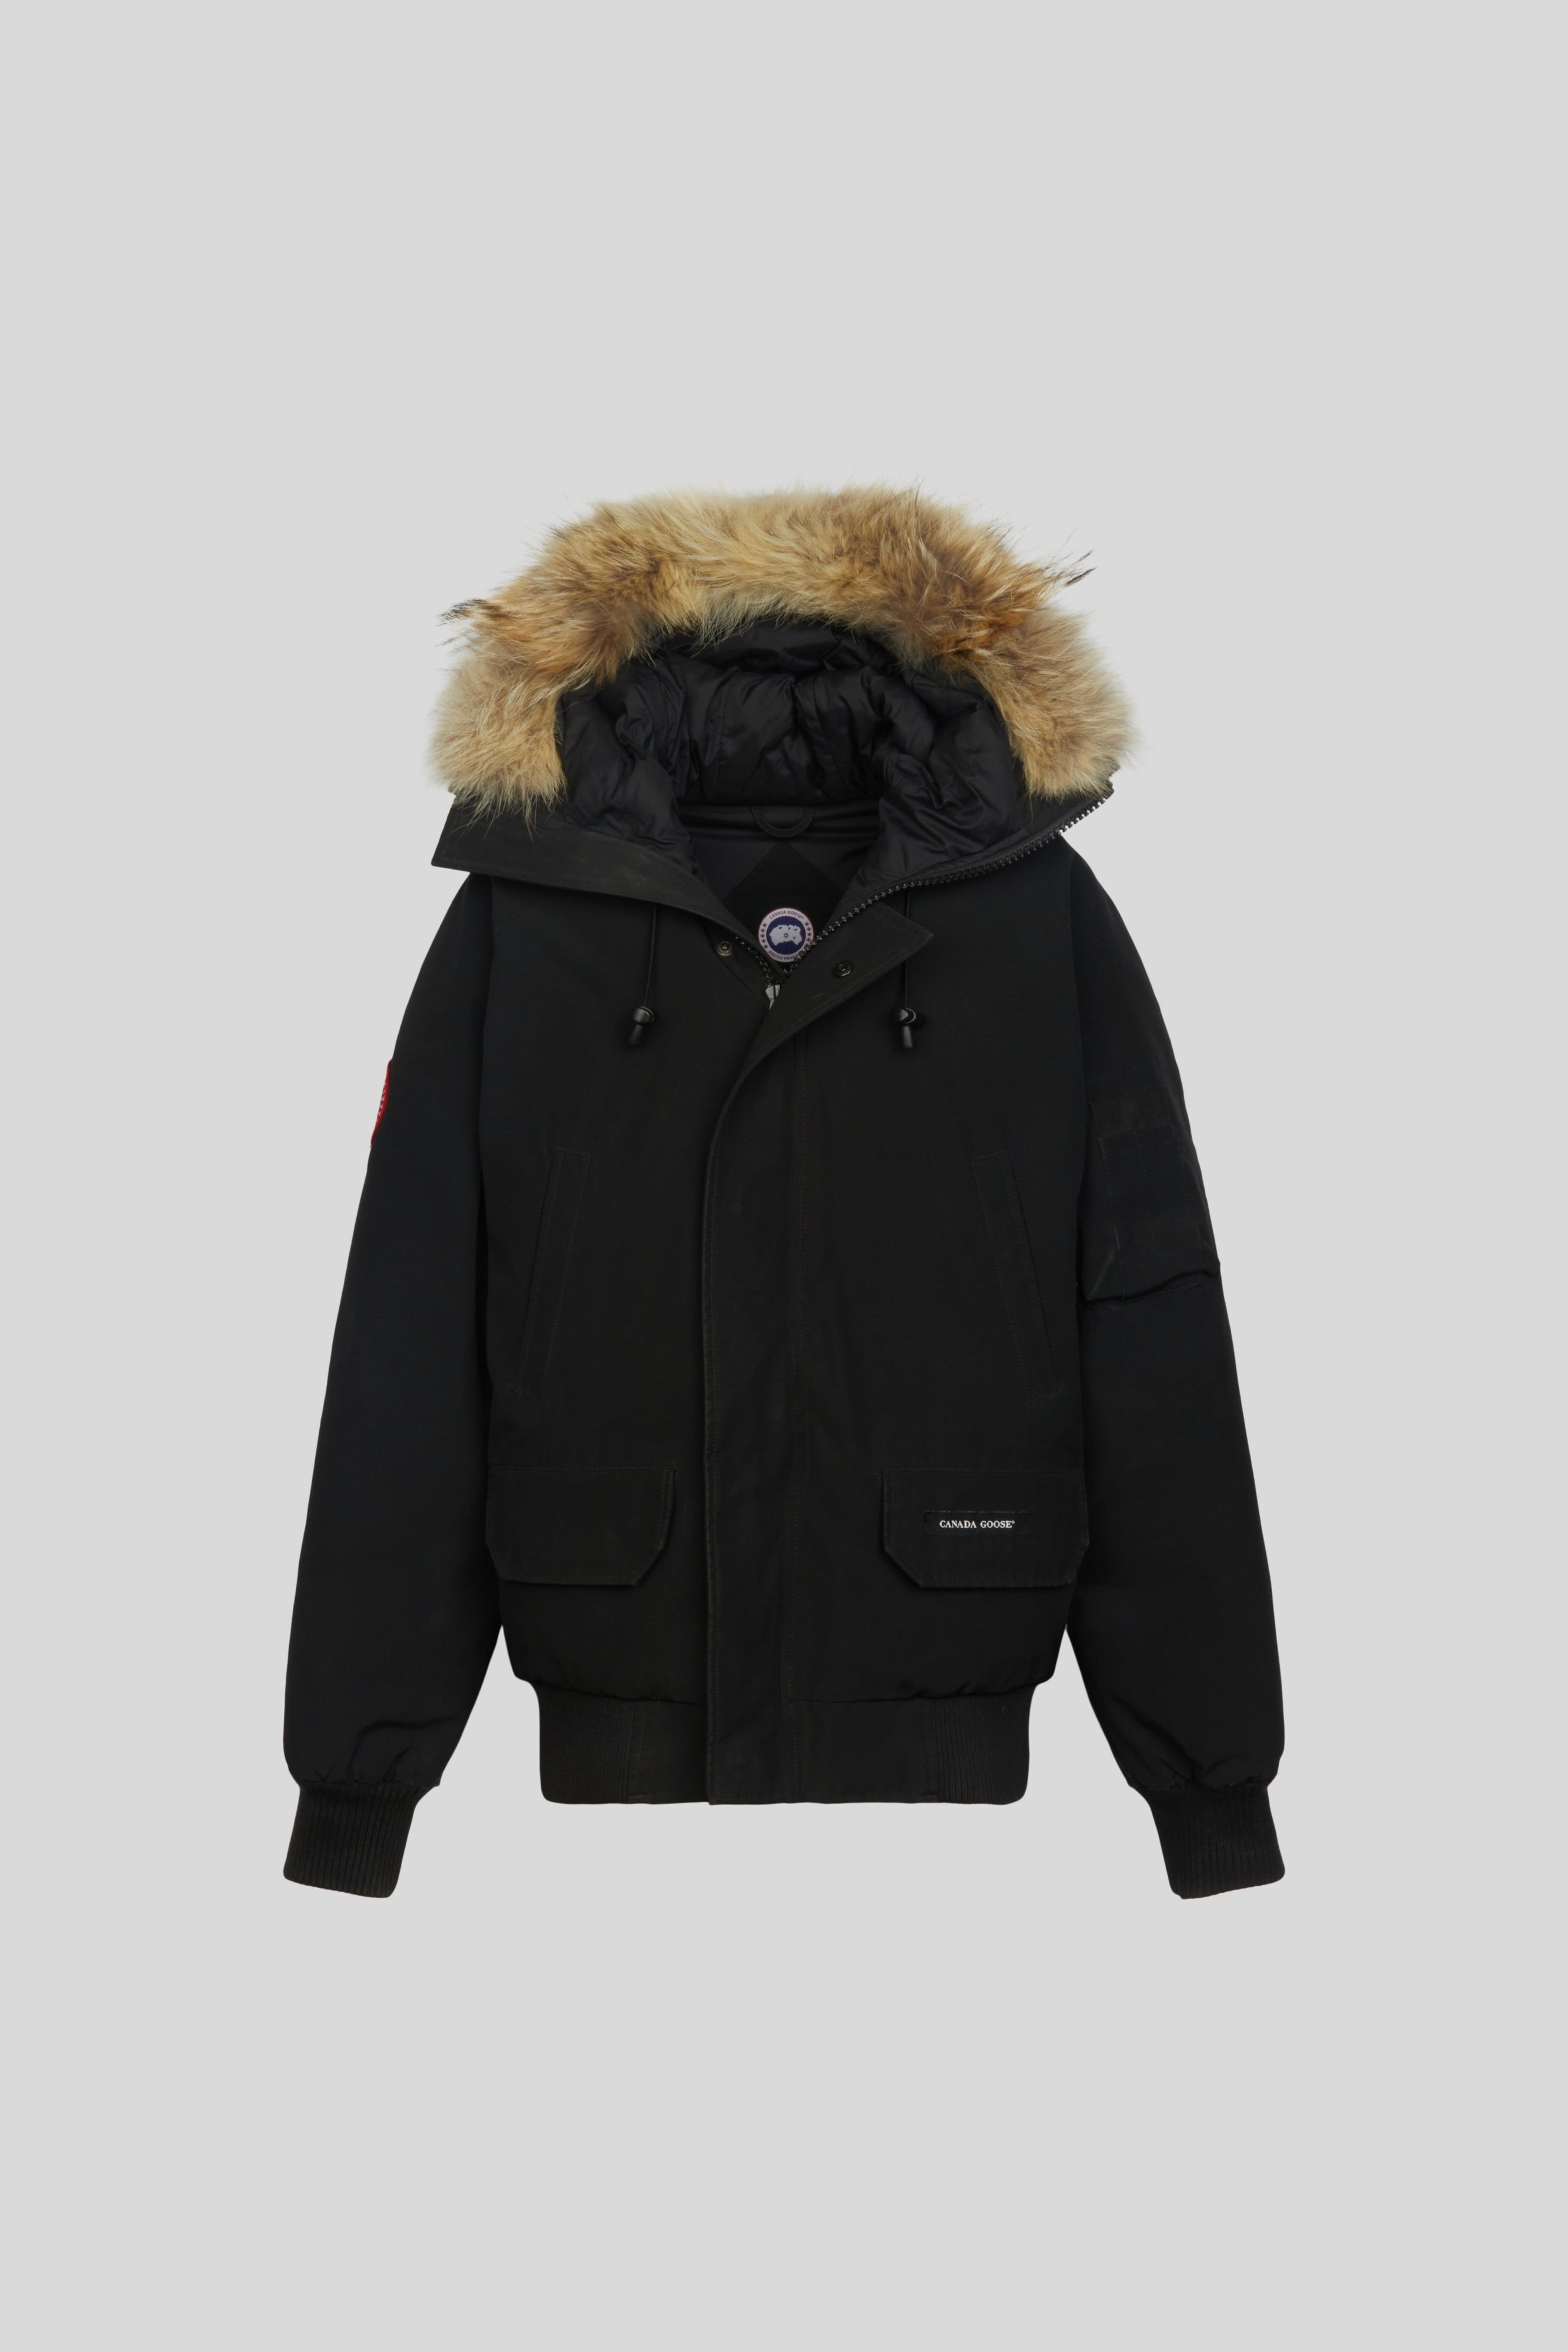 Used Men's Bombers for sale | Canada Goose Generations